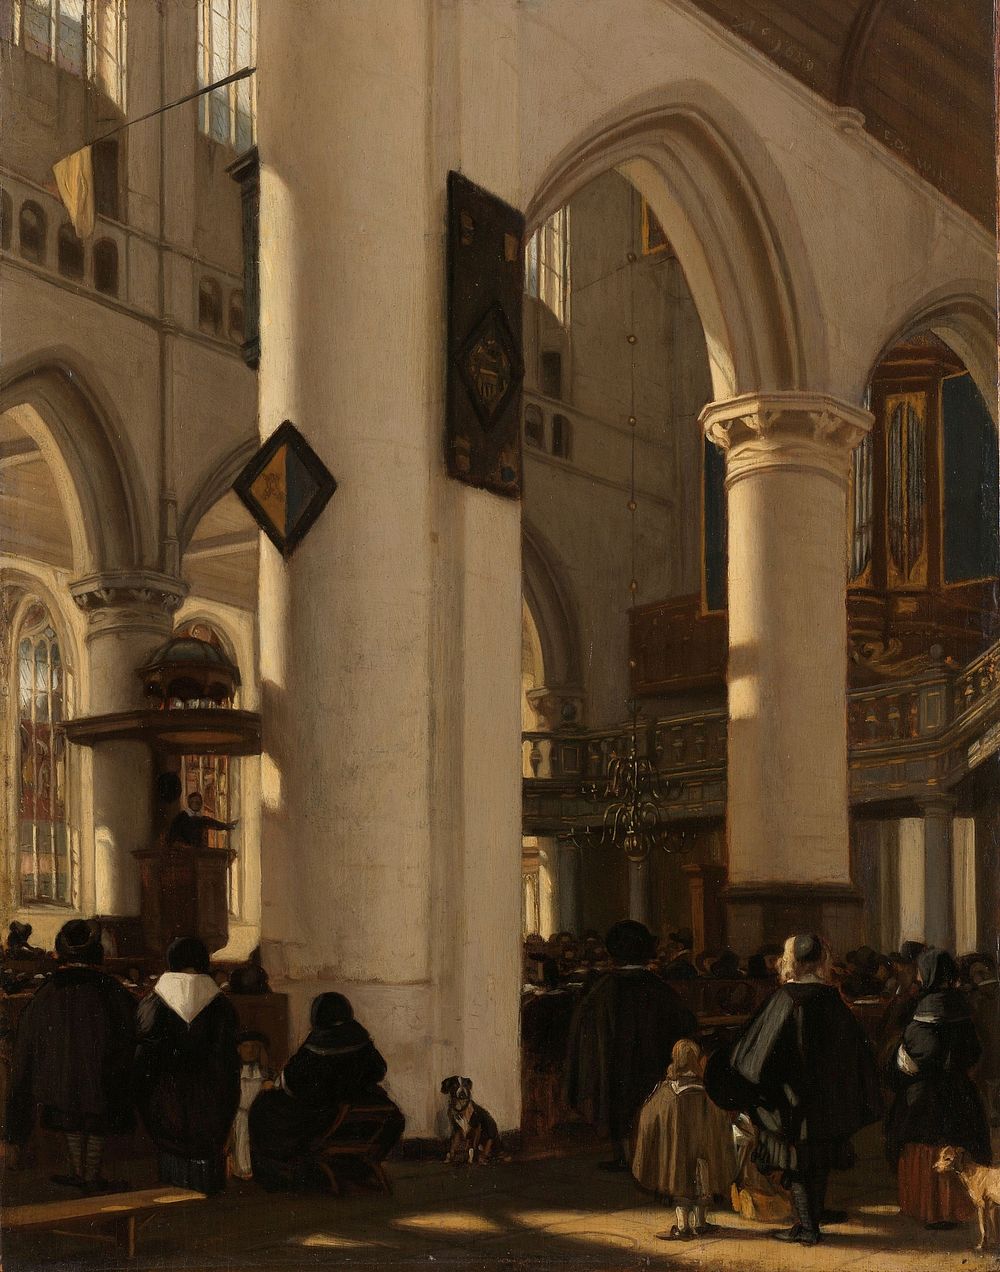 Interior of a Protestant, Gothic Church during a Service (1669) by Emanuel de Witte